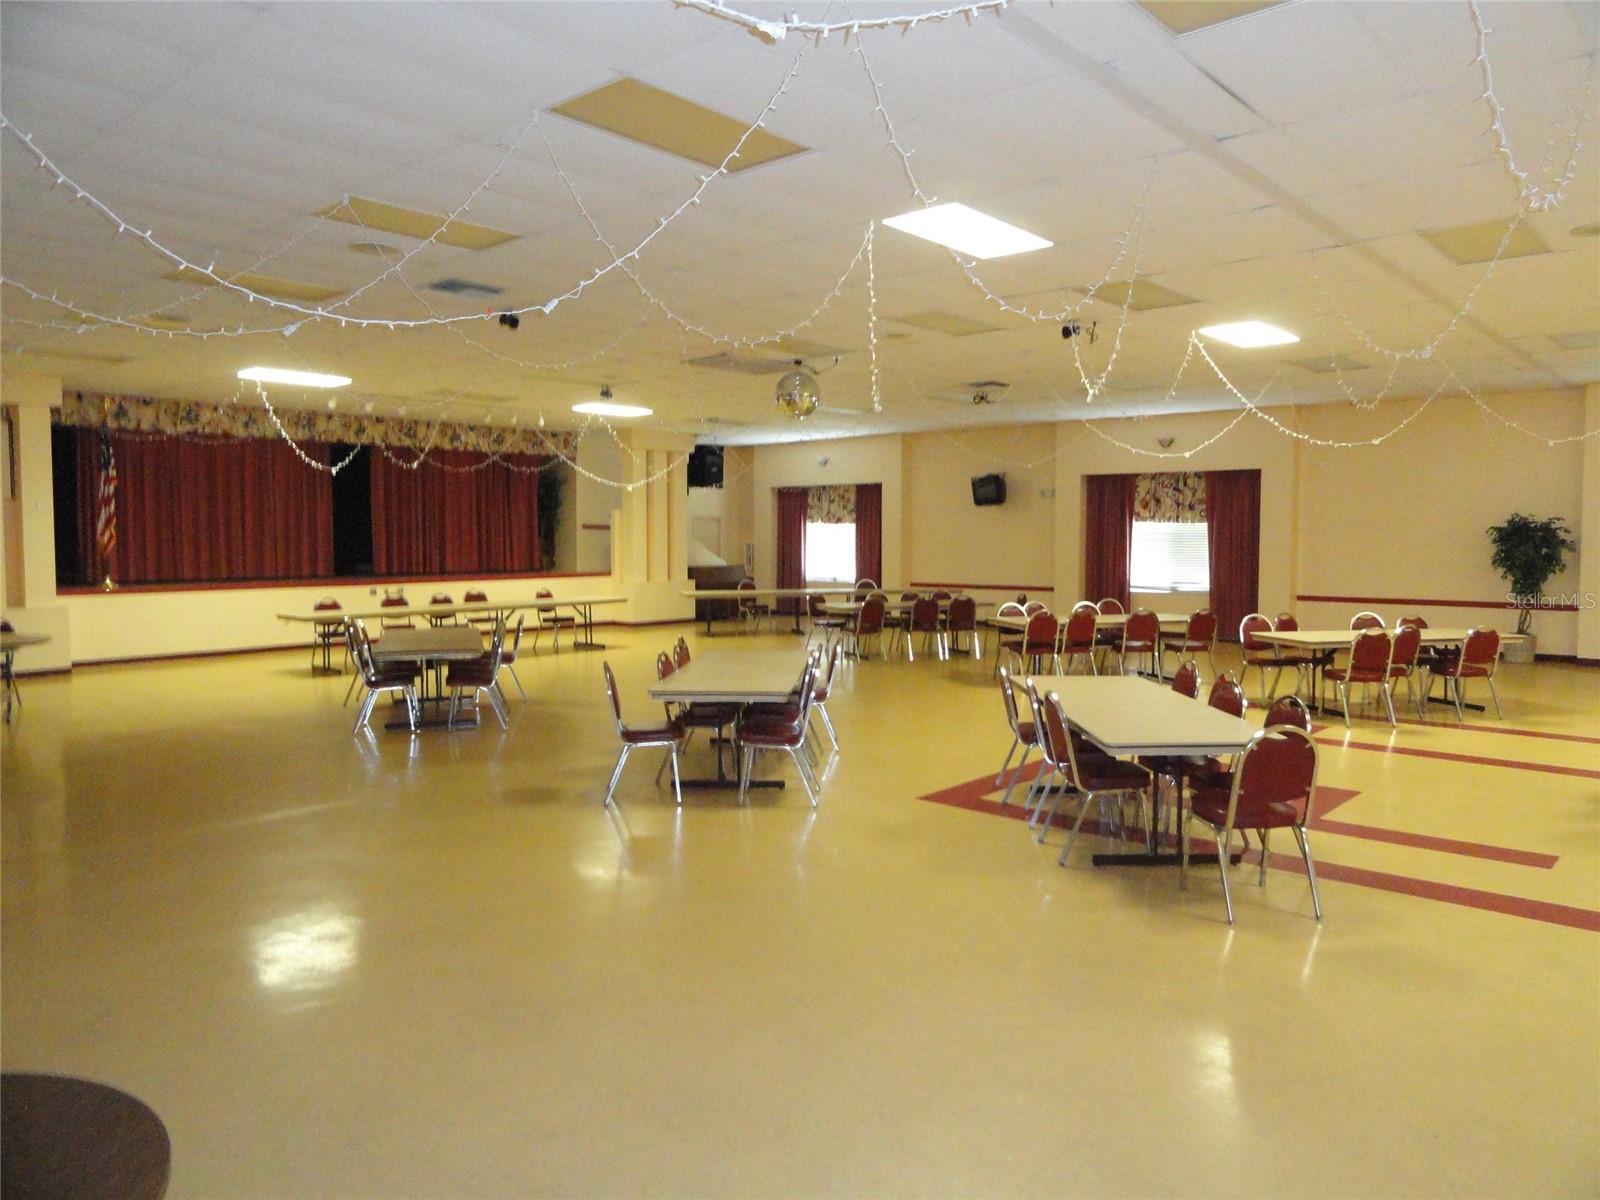 Huge hall for dinners, dances, and shows.